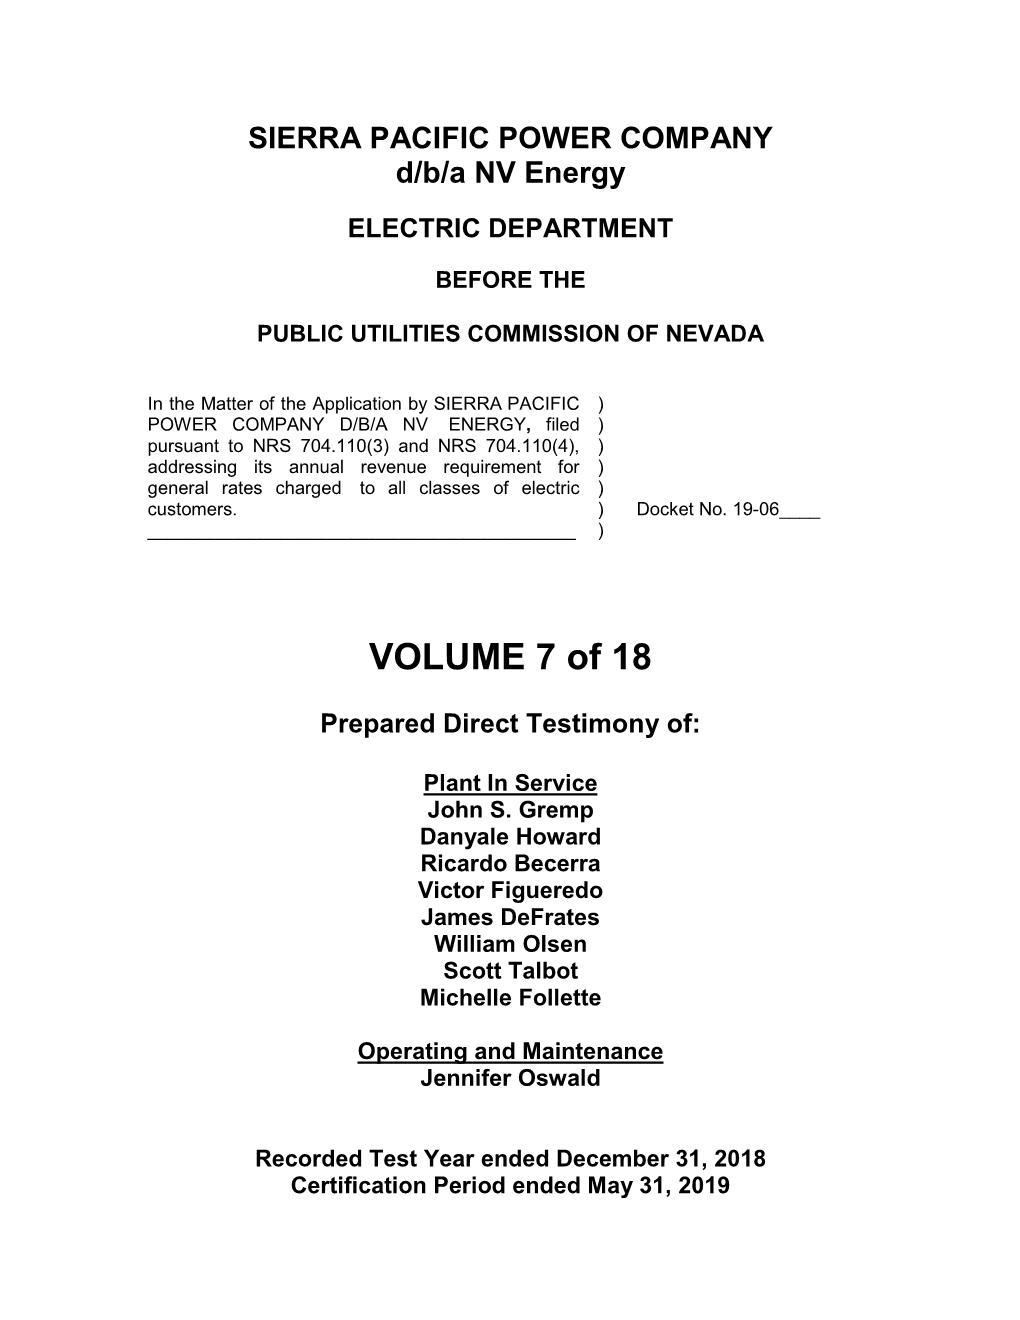 (SPPC) 2019 Electric General Rate Case Volume 7